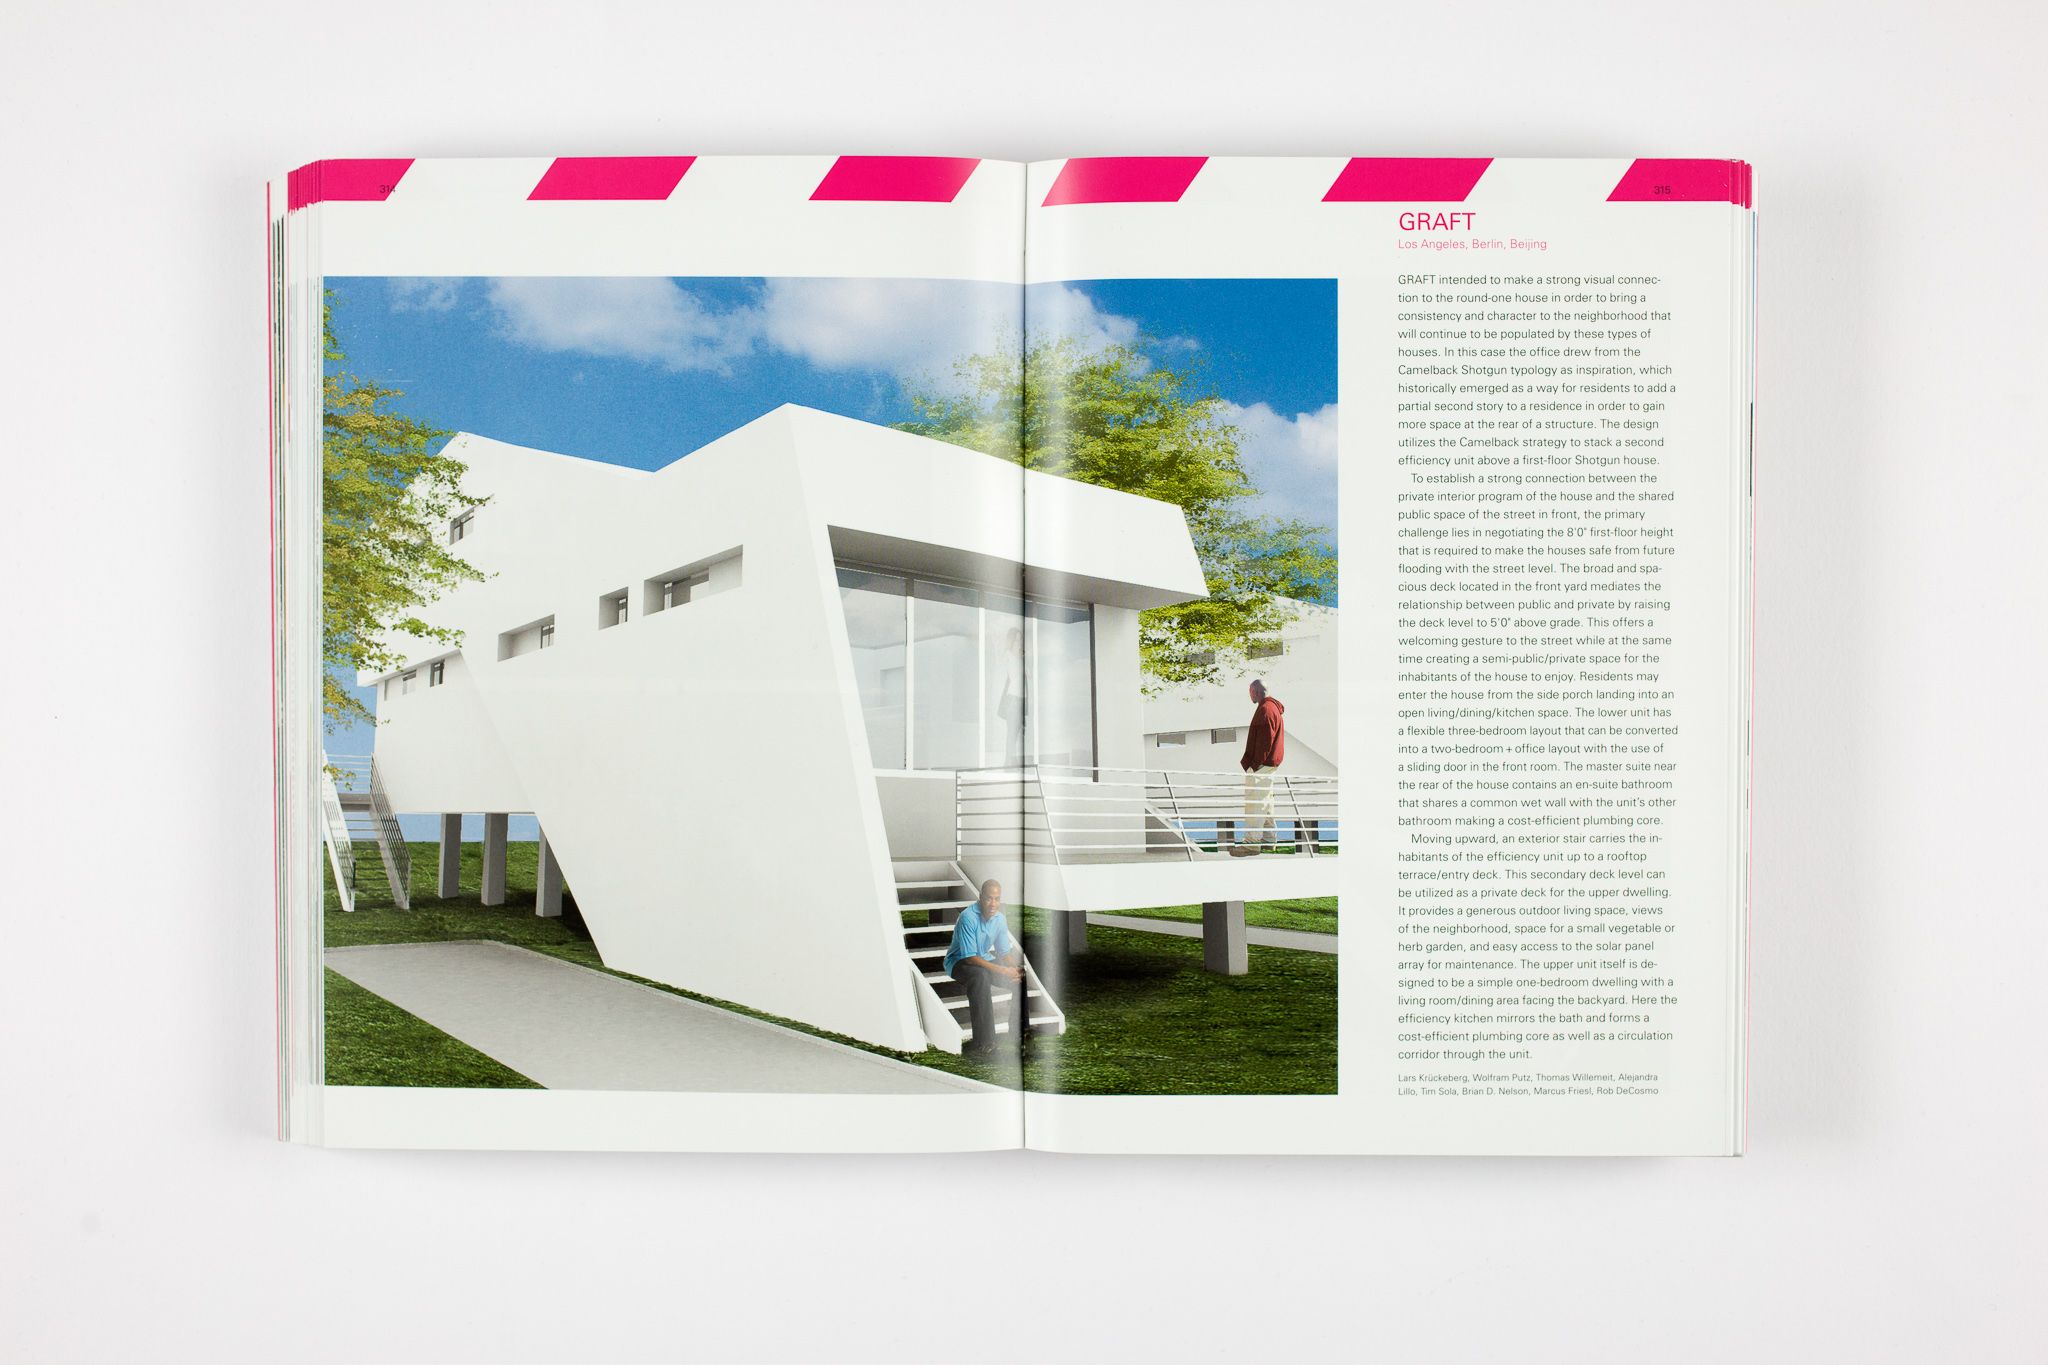      This book documents the process with numerous photos, plans, and renderings as well as written commentary from the architects. Besides Brad Pitt’s foreword in which he writes of his motivations to bring the Make It Right Foundation to life, the book also includes essays regarding the entire design process and the cradle-to-cradle concept. In addition, the ‘Pink Project’, a Land Art awareness installation from Brad Pitt and GRAFT, generated interest in the international media thereby helping to attract financing for the MIR housing project.         This book can also serve as an instruction manual for people and other initiatives confronted with similar circumstances. MIR is currently working to extend their aid programs to other areas in need across the USA.